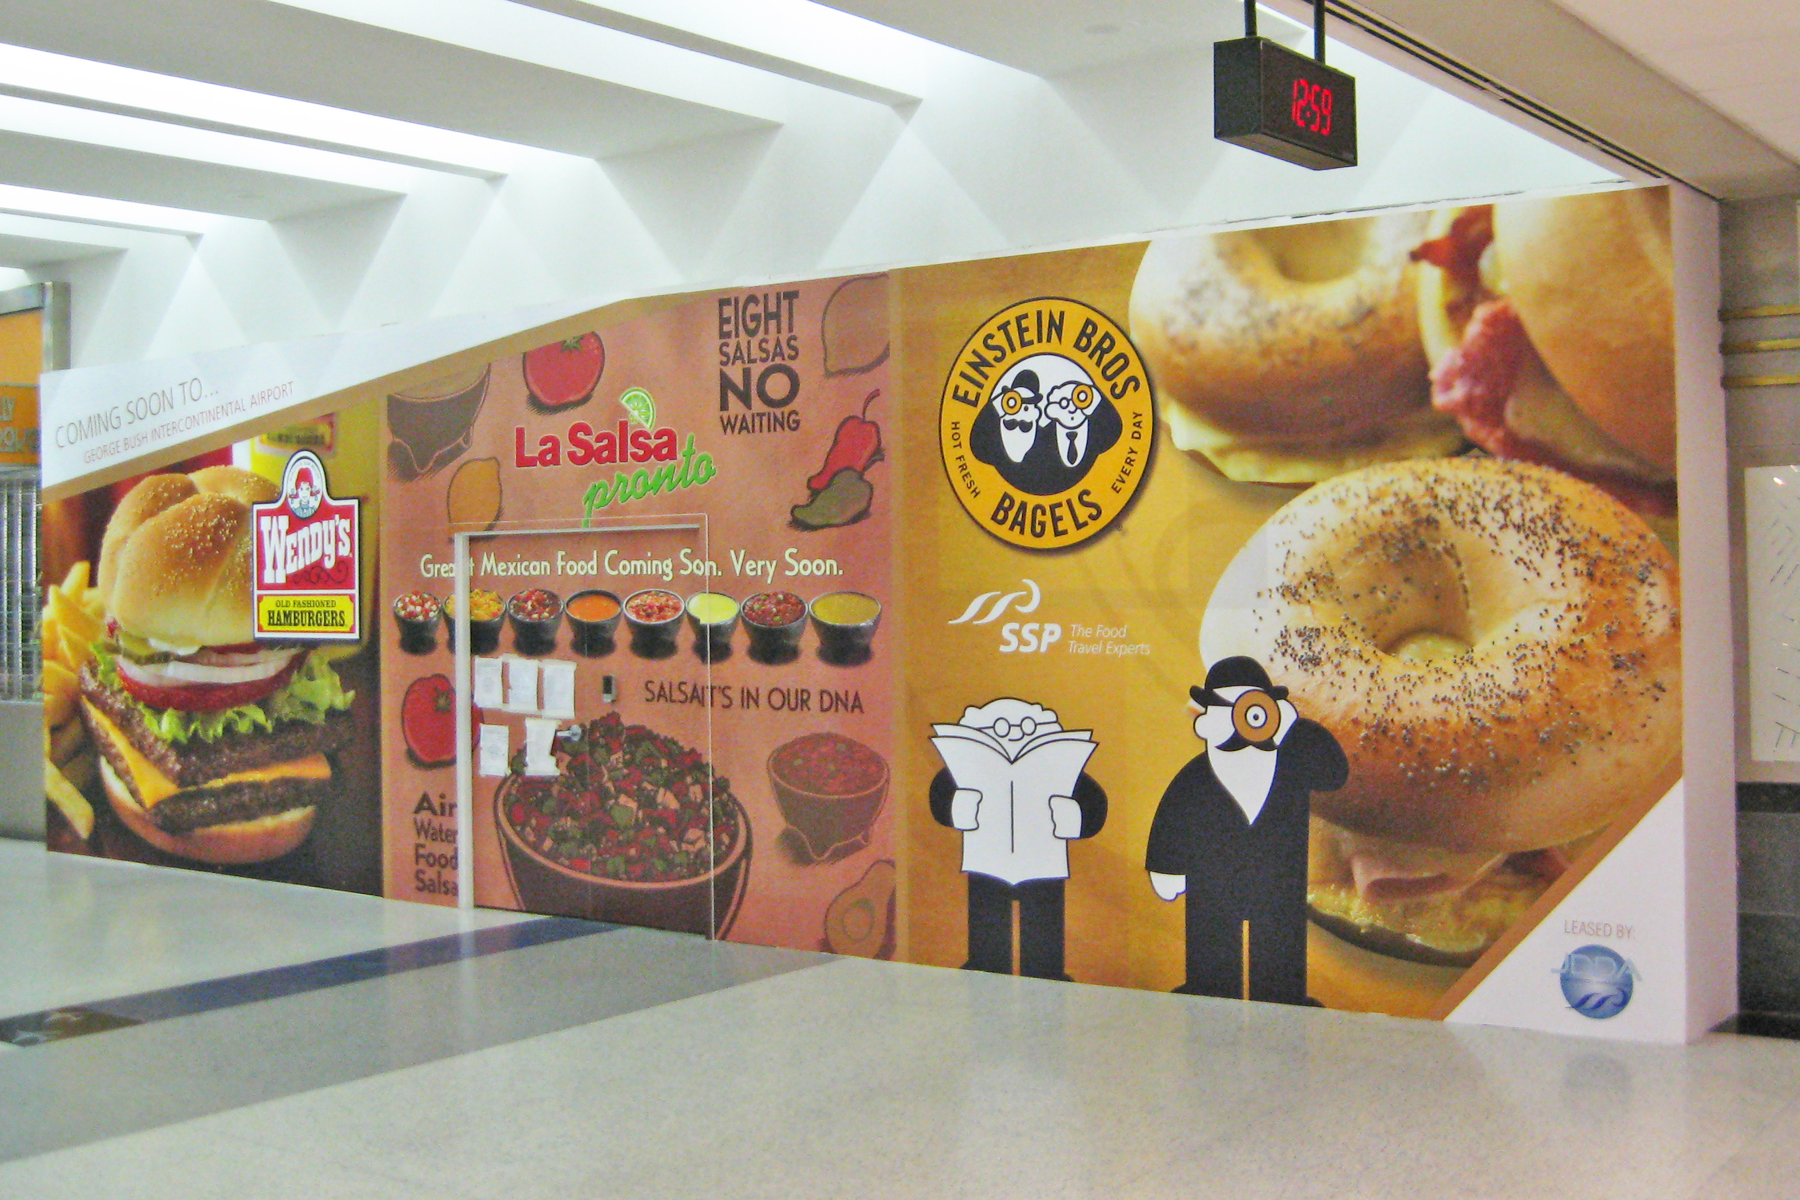 Custom Designed Wall Murals for Fast Food Chains - OnSite Advertising through Wall Art Decals